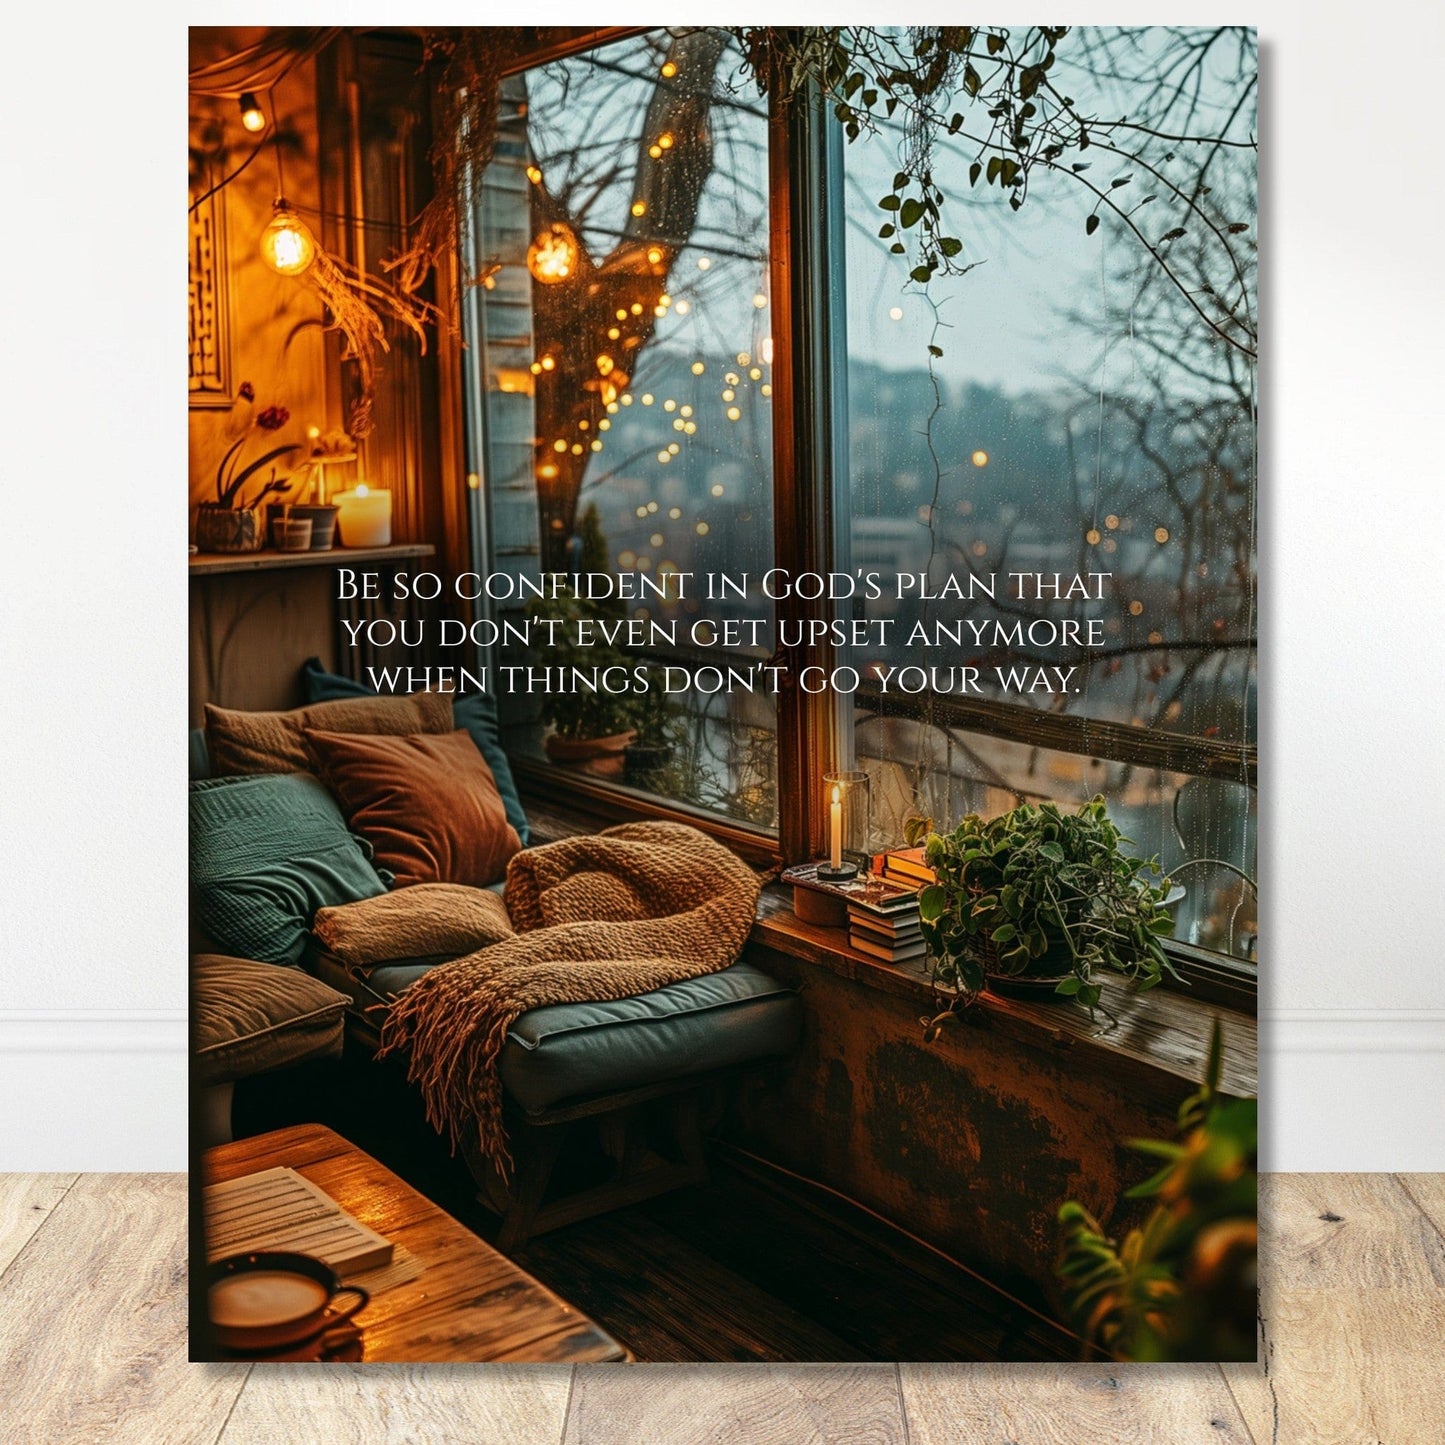 Coffee With My Father Print Material 40x50 cm / 16x20″ / Premium Matte Paper Poster / - Premium Matte Paper Wooden Framed Poster